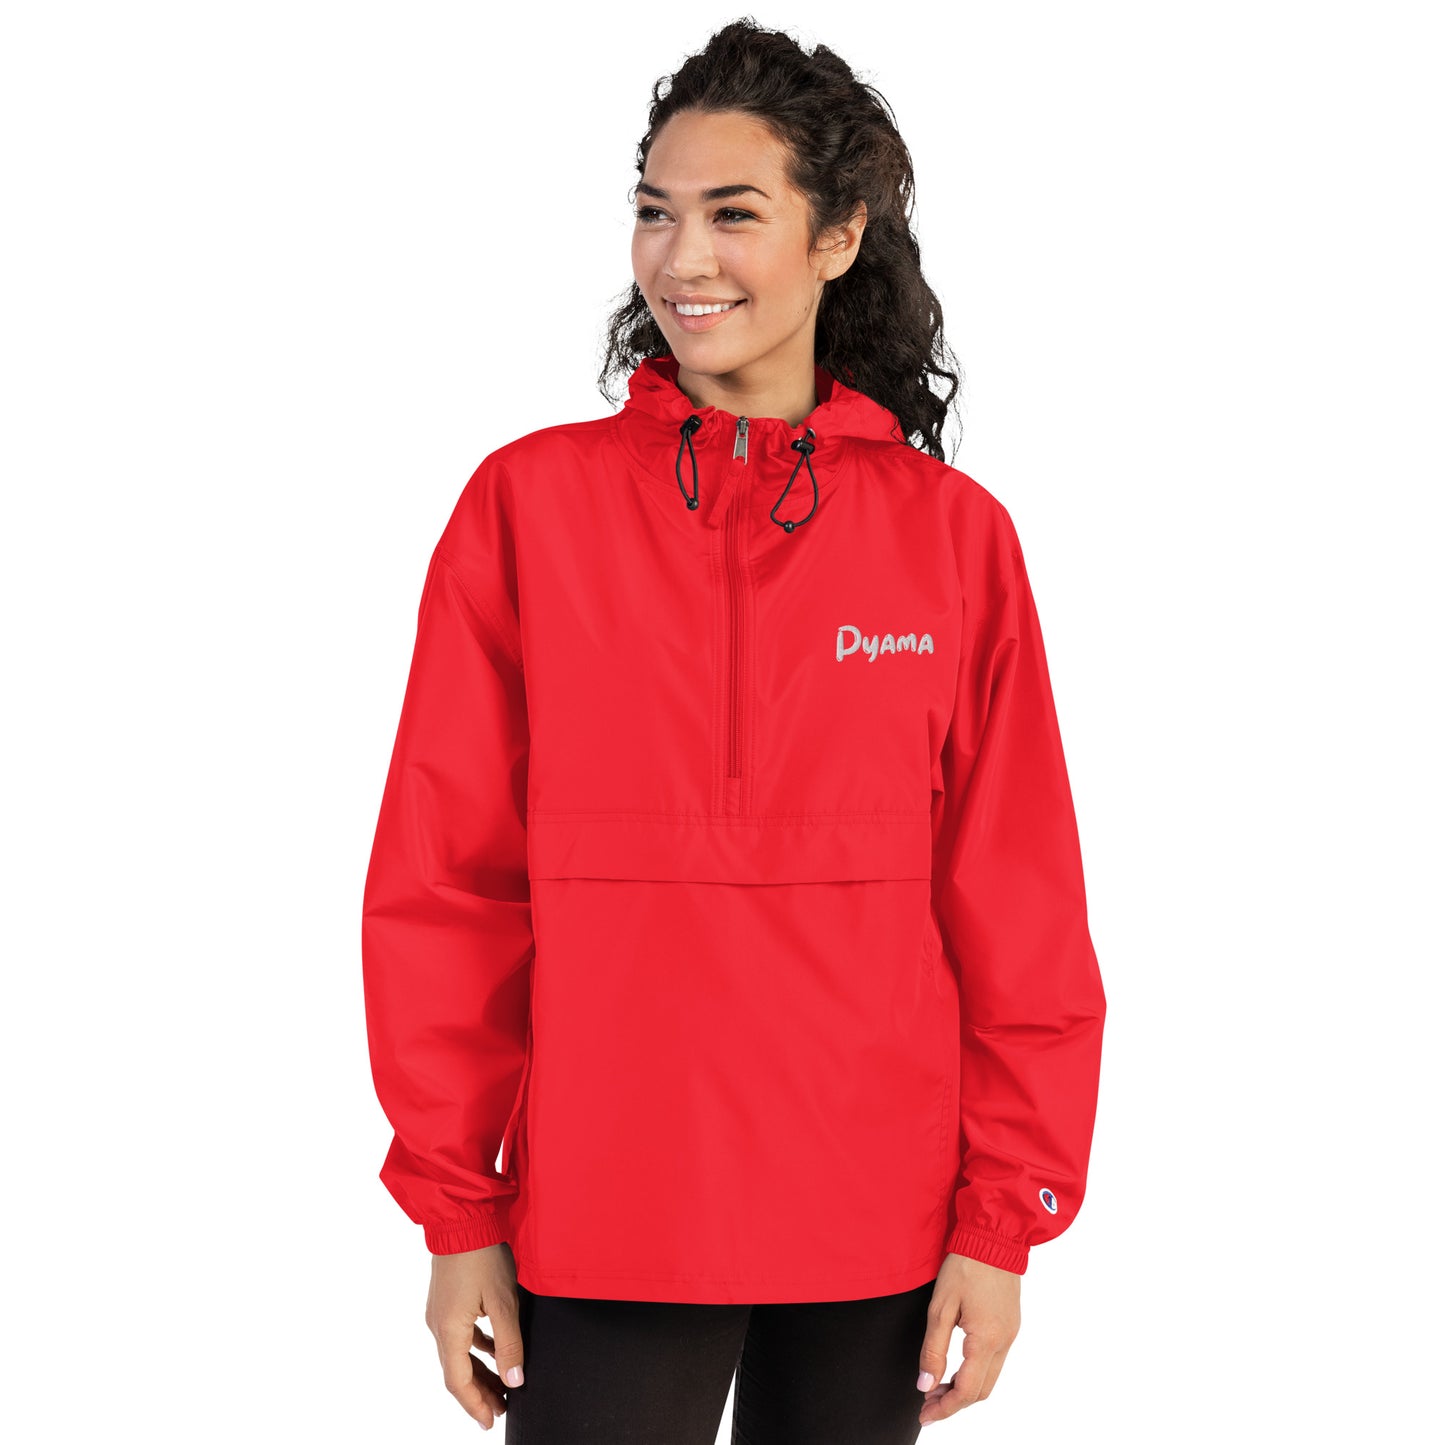 Embroidered Champion Packable Jacket PYAMA Red